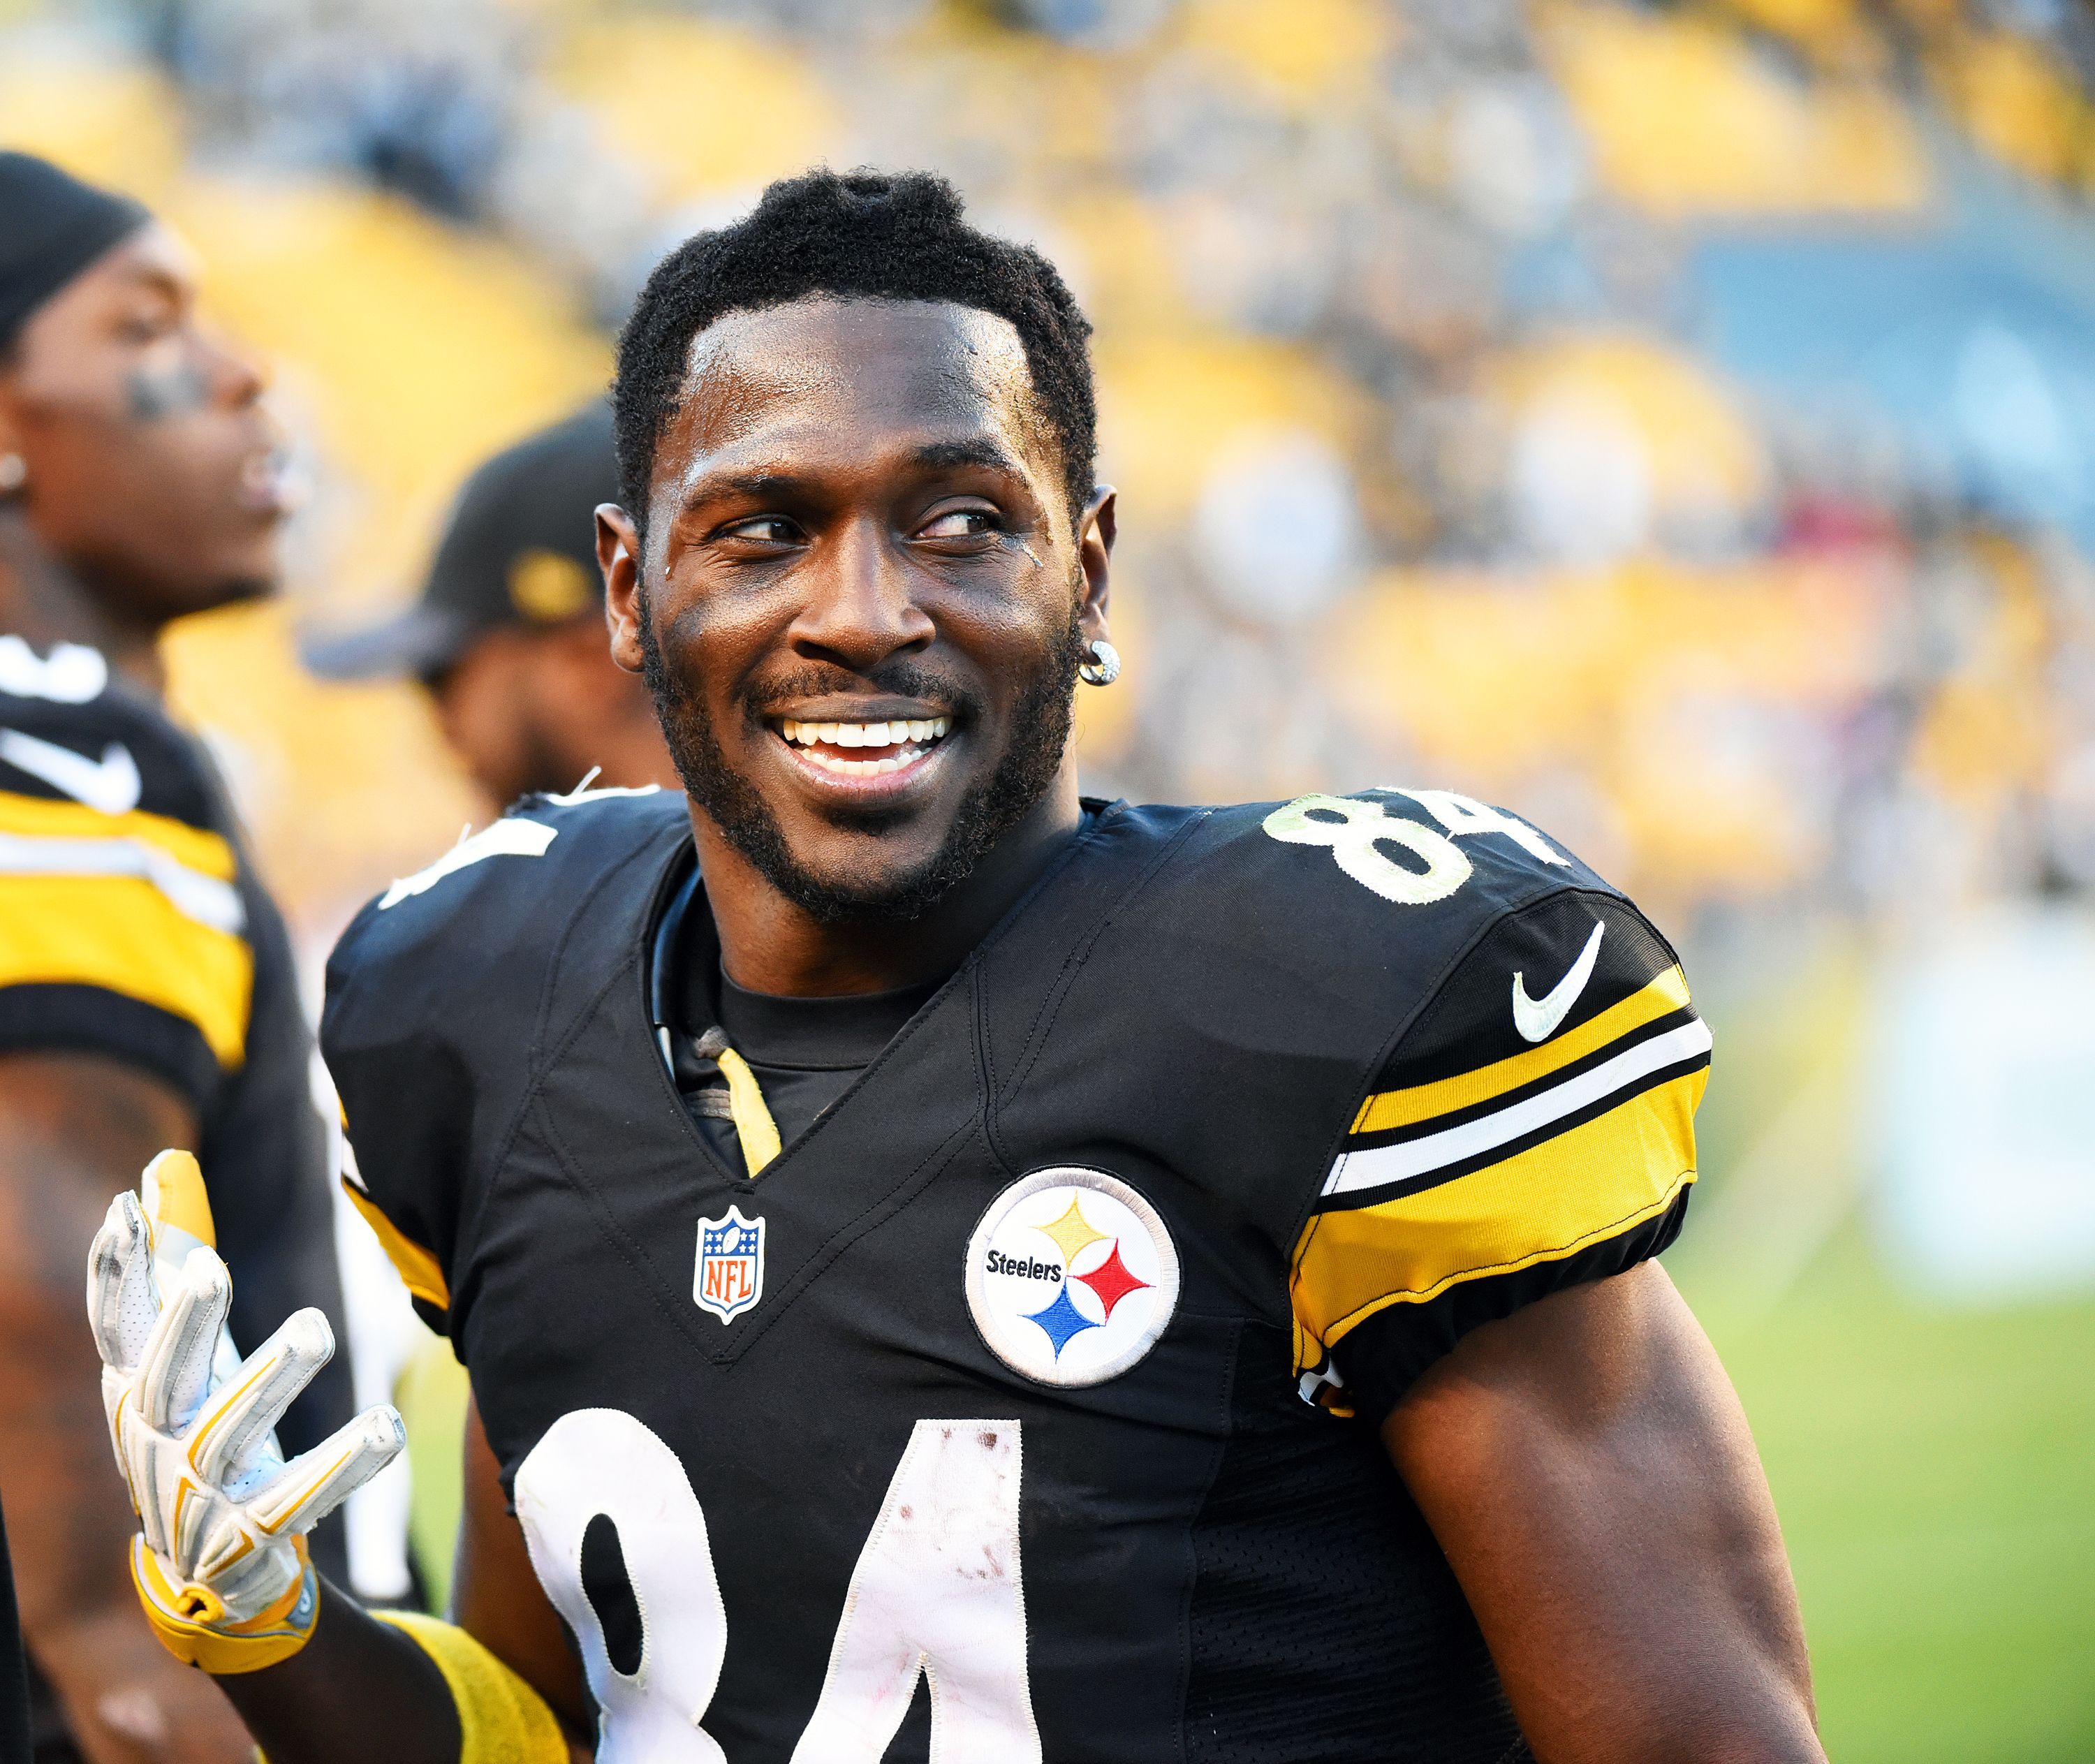 Steelers Antonio Brown Admits I Have Some Growing Up to Do Following Notorious Facebook Live Locker Room Video News BET